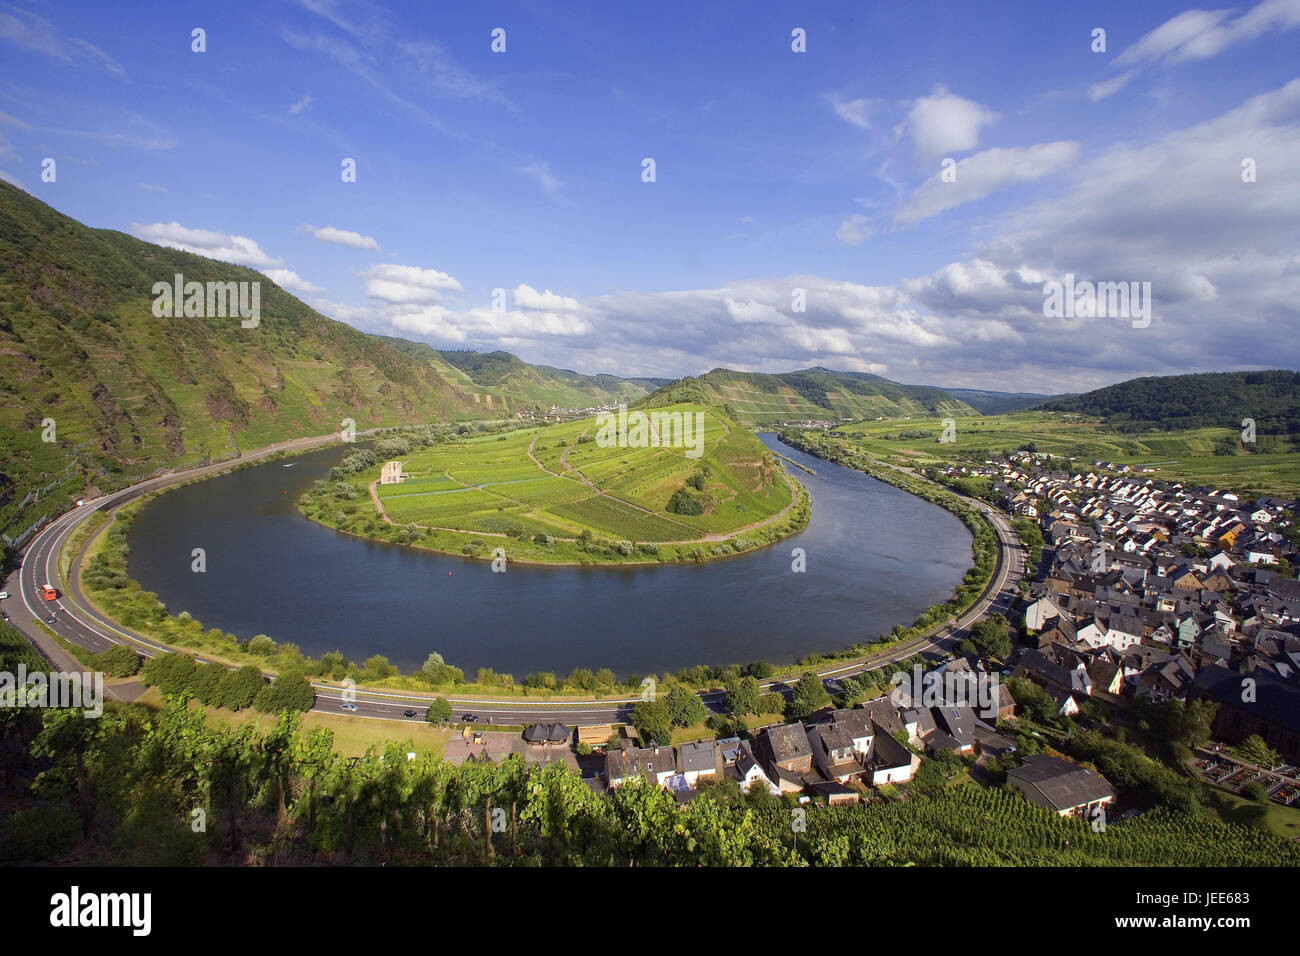 Germany, Rhineland-Palatinate, Bremm, local overview, the Moselle, Moselle loop, Moselle valley, place, houses, residential houses, flux loop, river, wine region, viticulture, wine-growing area, vineyards, destination, tourism, street, sky, clouds, Stock Photo